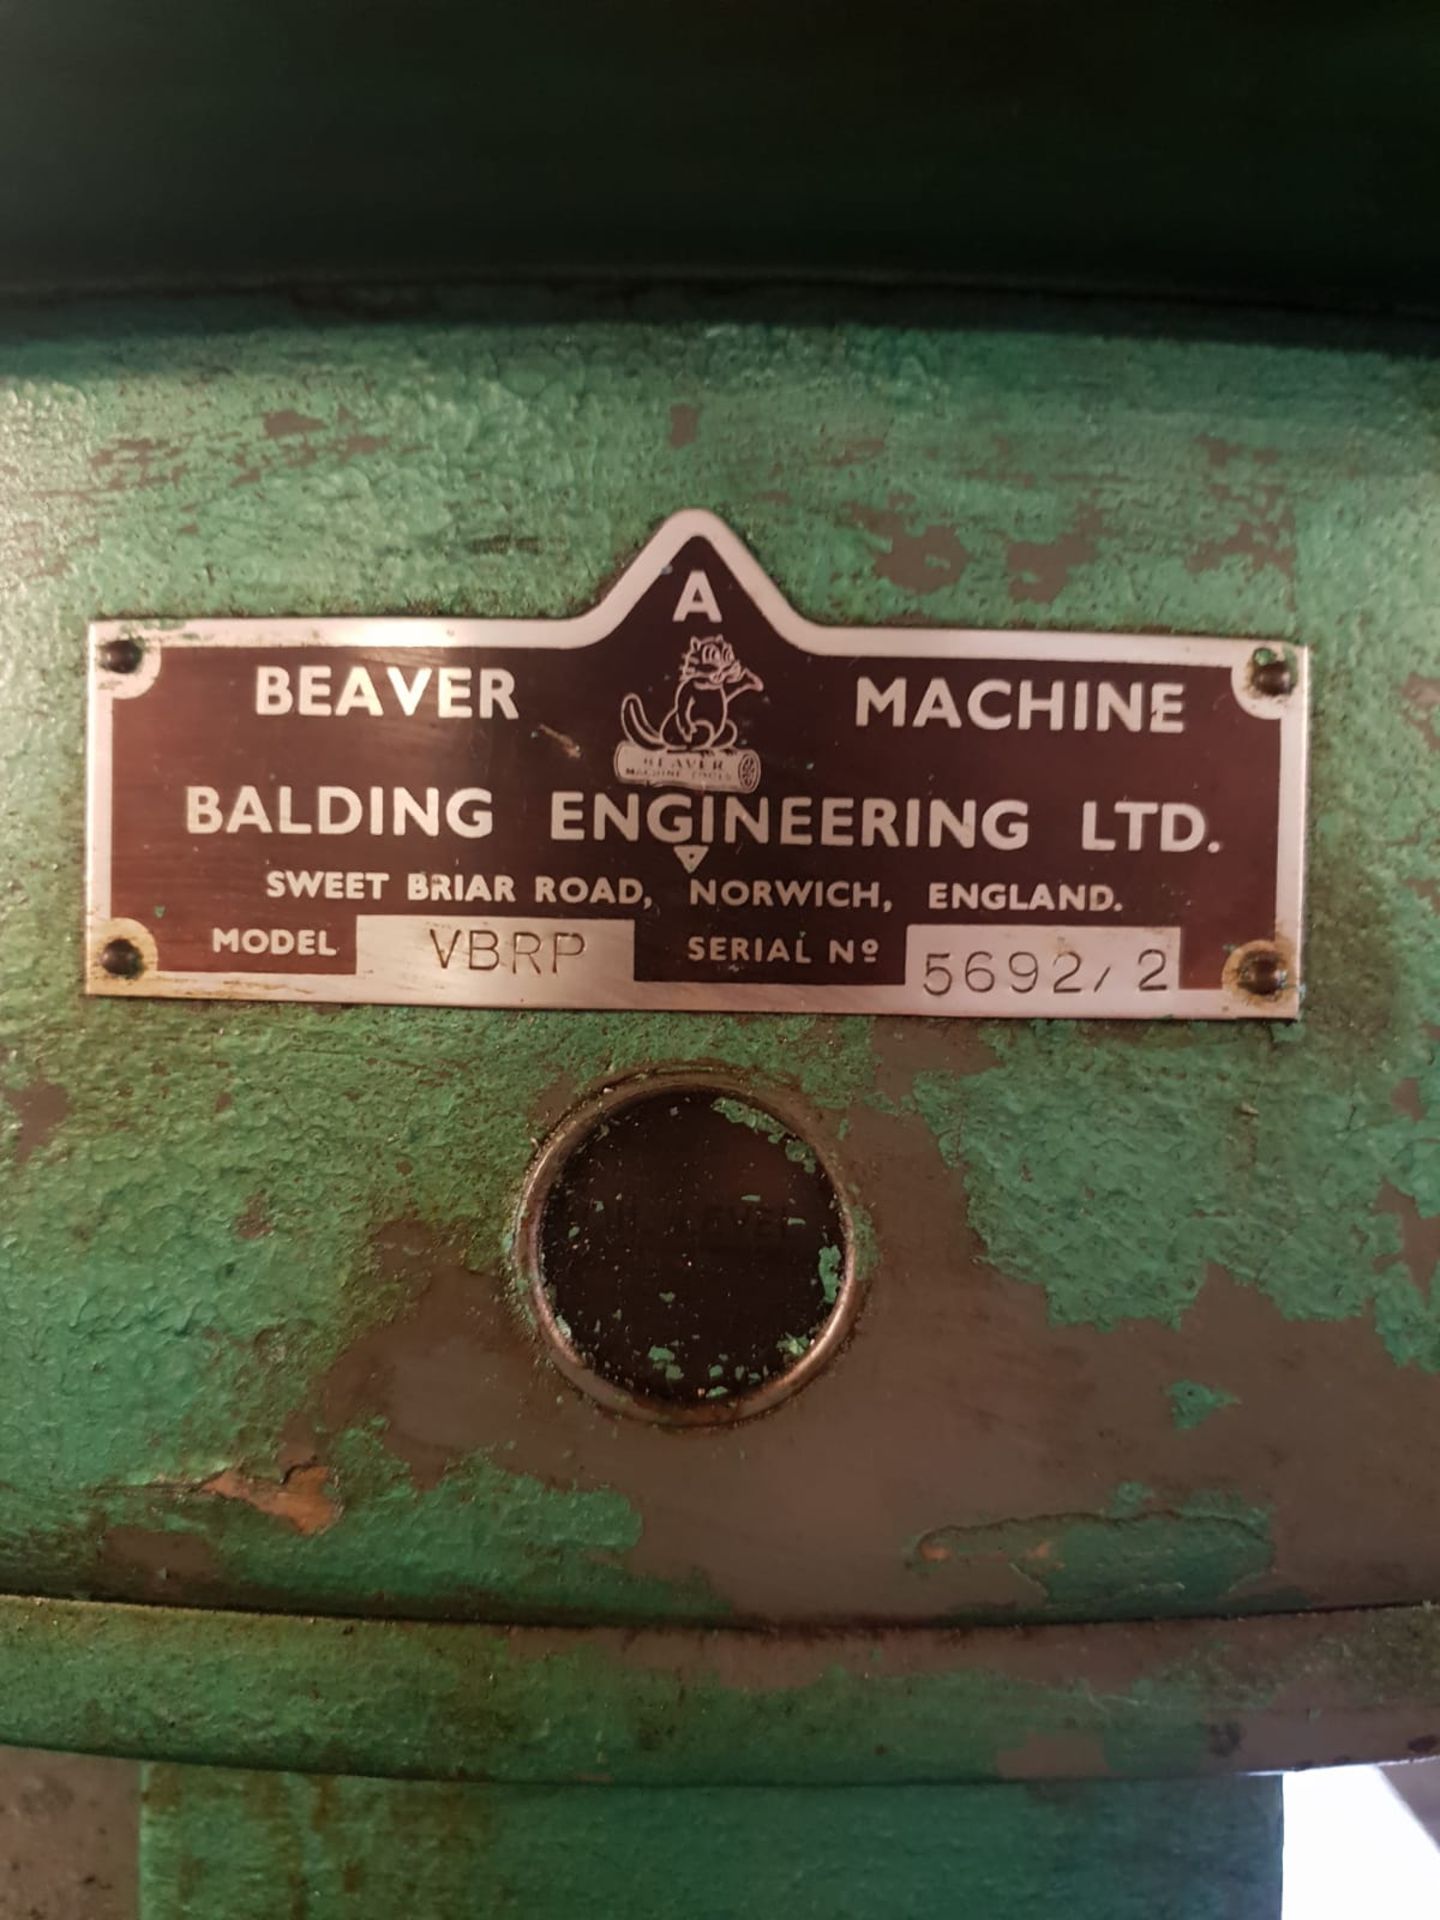 BEAVER MILLING MACHINE 3-PHASE POWER, GOOD RELIABLE MACHINE, LOADING FACILITIES ON SITE *PLUS VAT* - Image 4 of 8